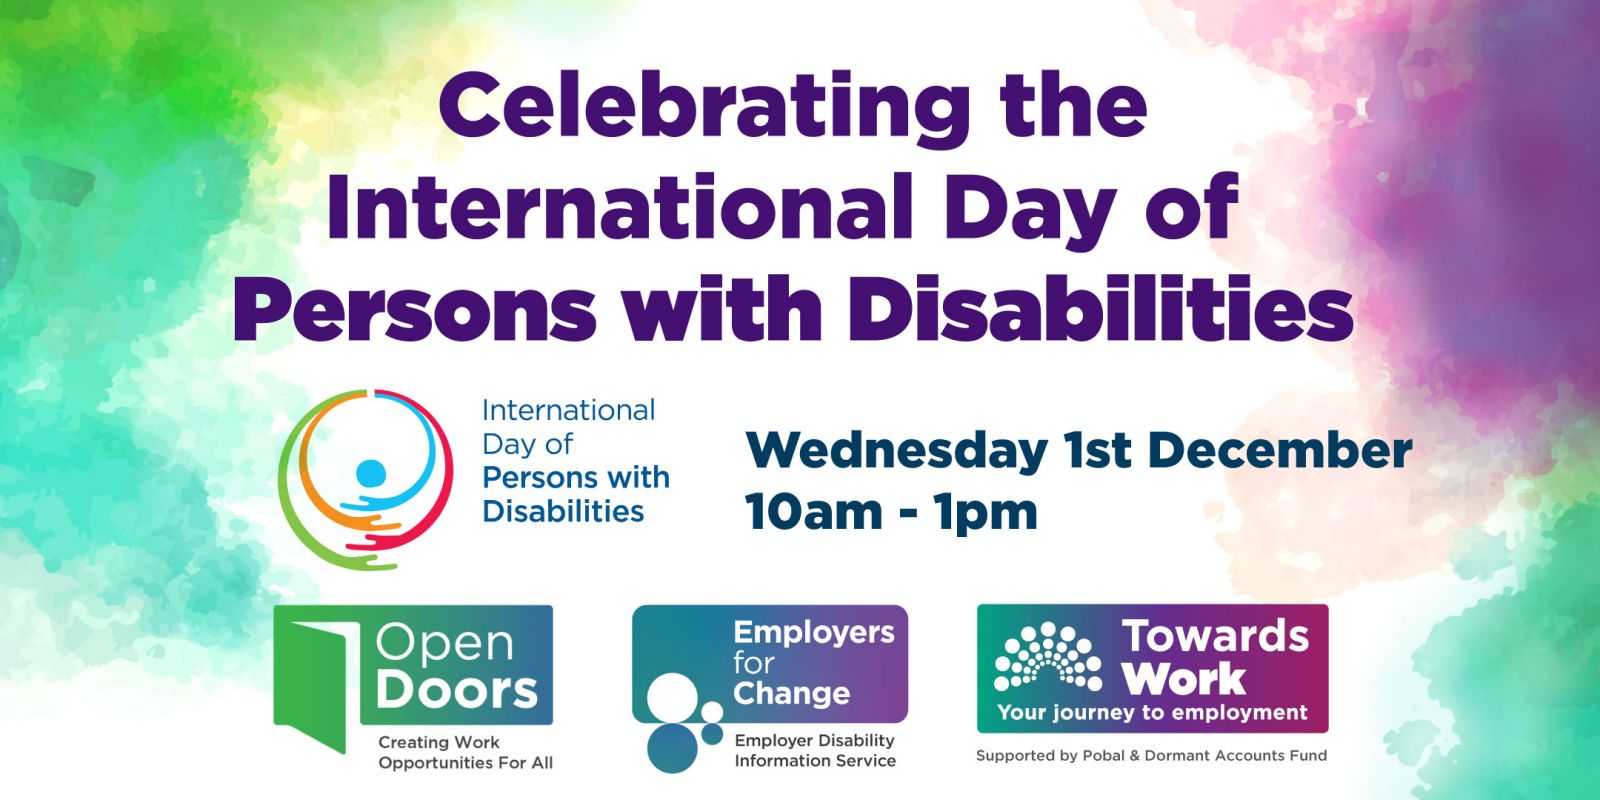 Celebrating the International Day of Persons with Disabilities: 1st December 2021 from 10am to 1pm. An event with Open Doors Initiative, Employers for Change and Towards Work. 